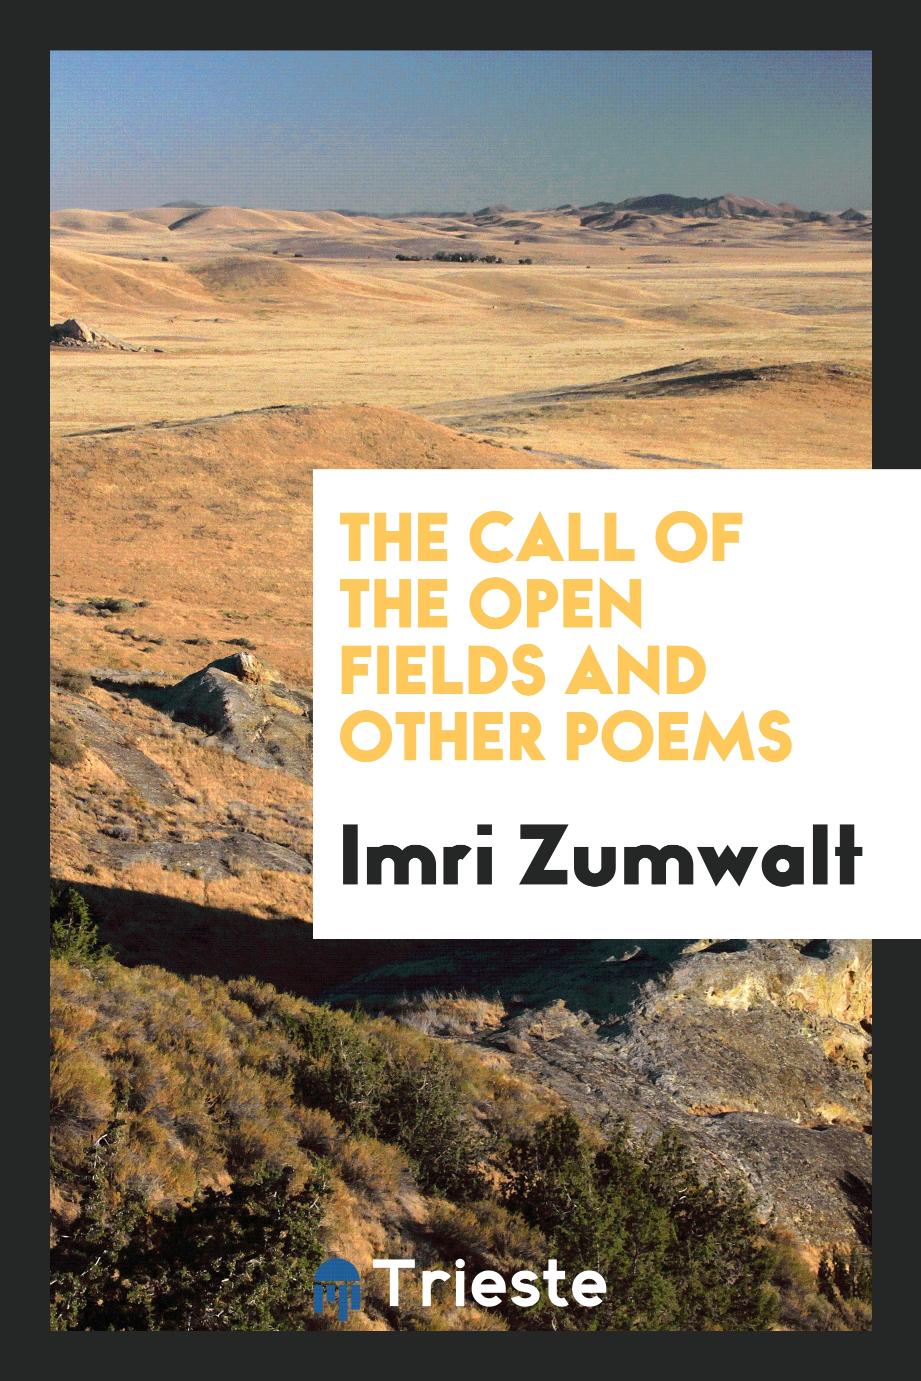 The call of the open fields and other poems